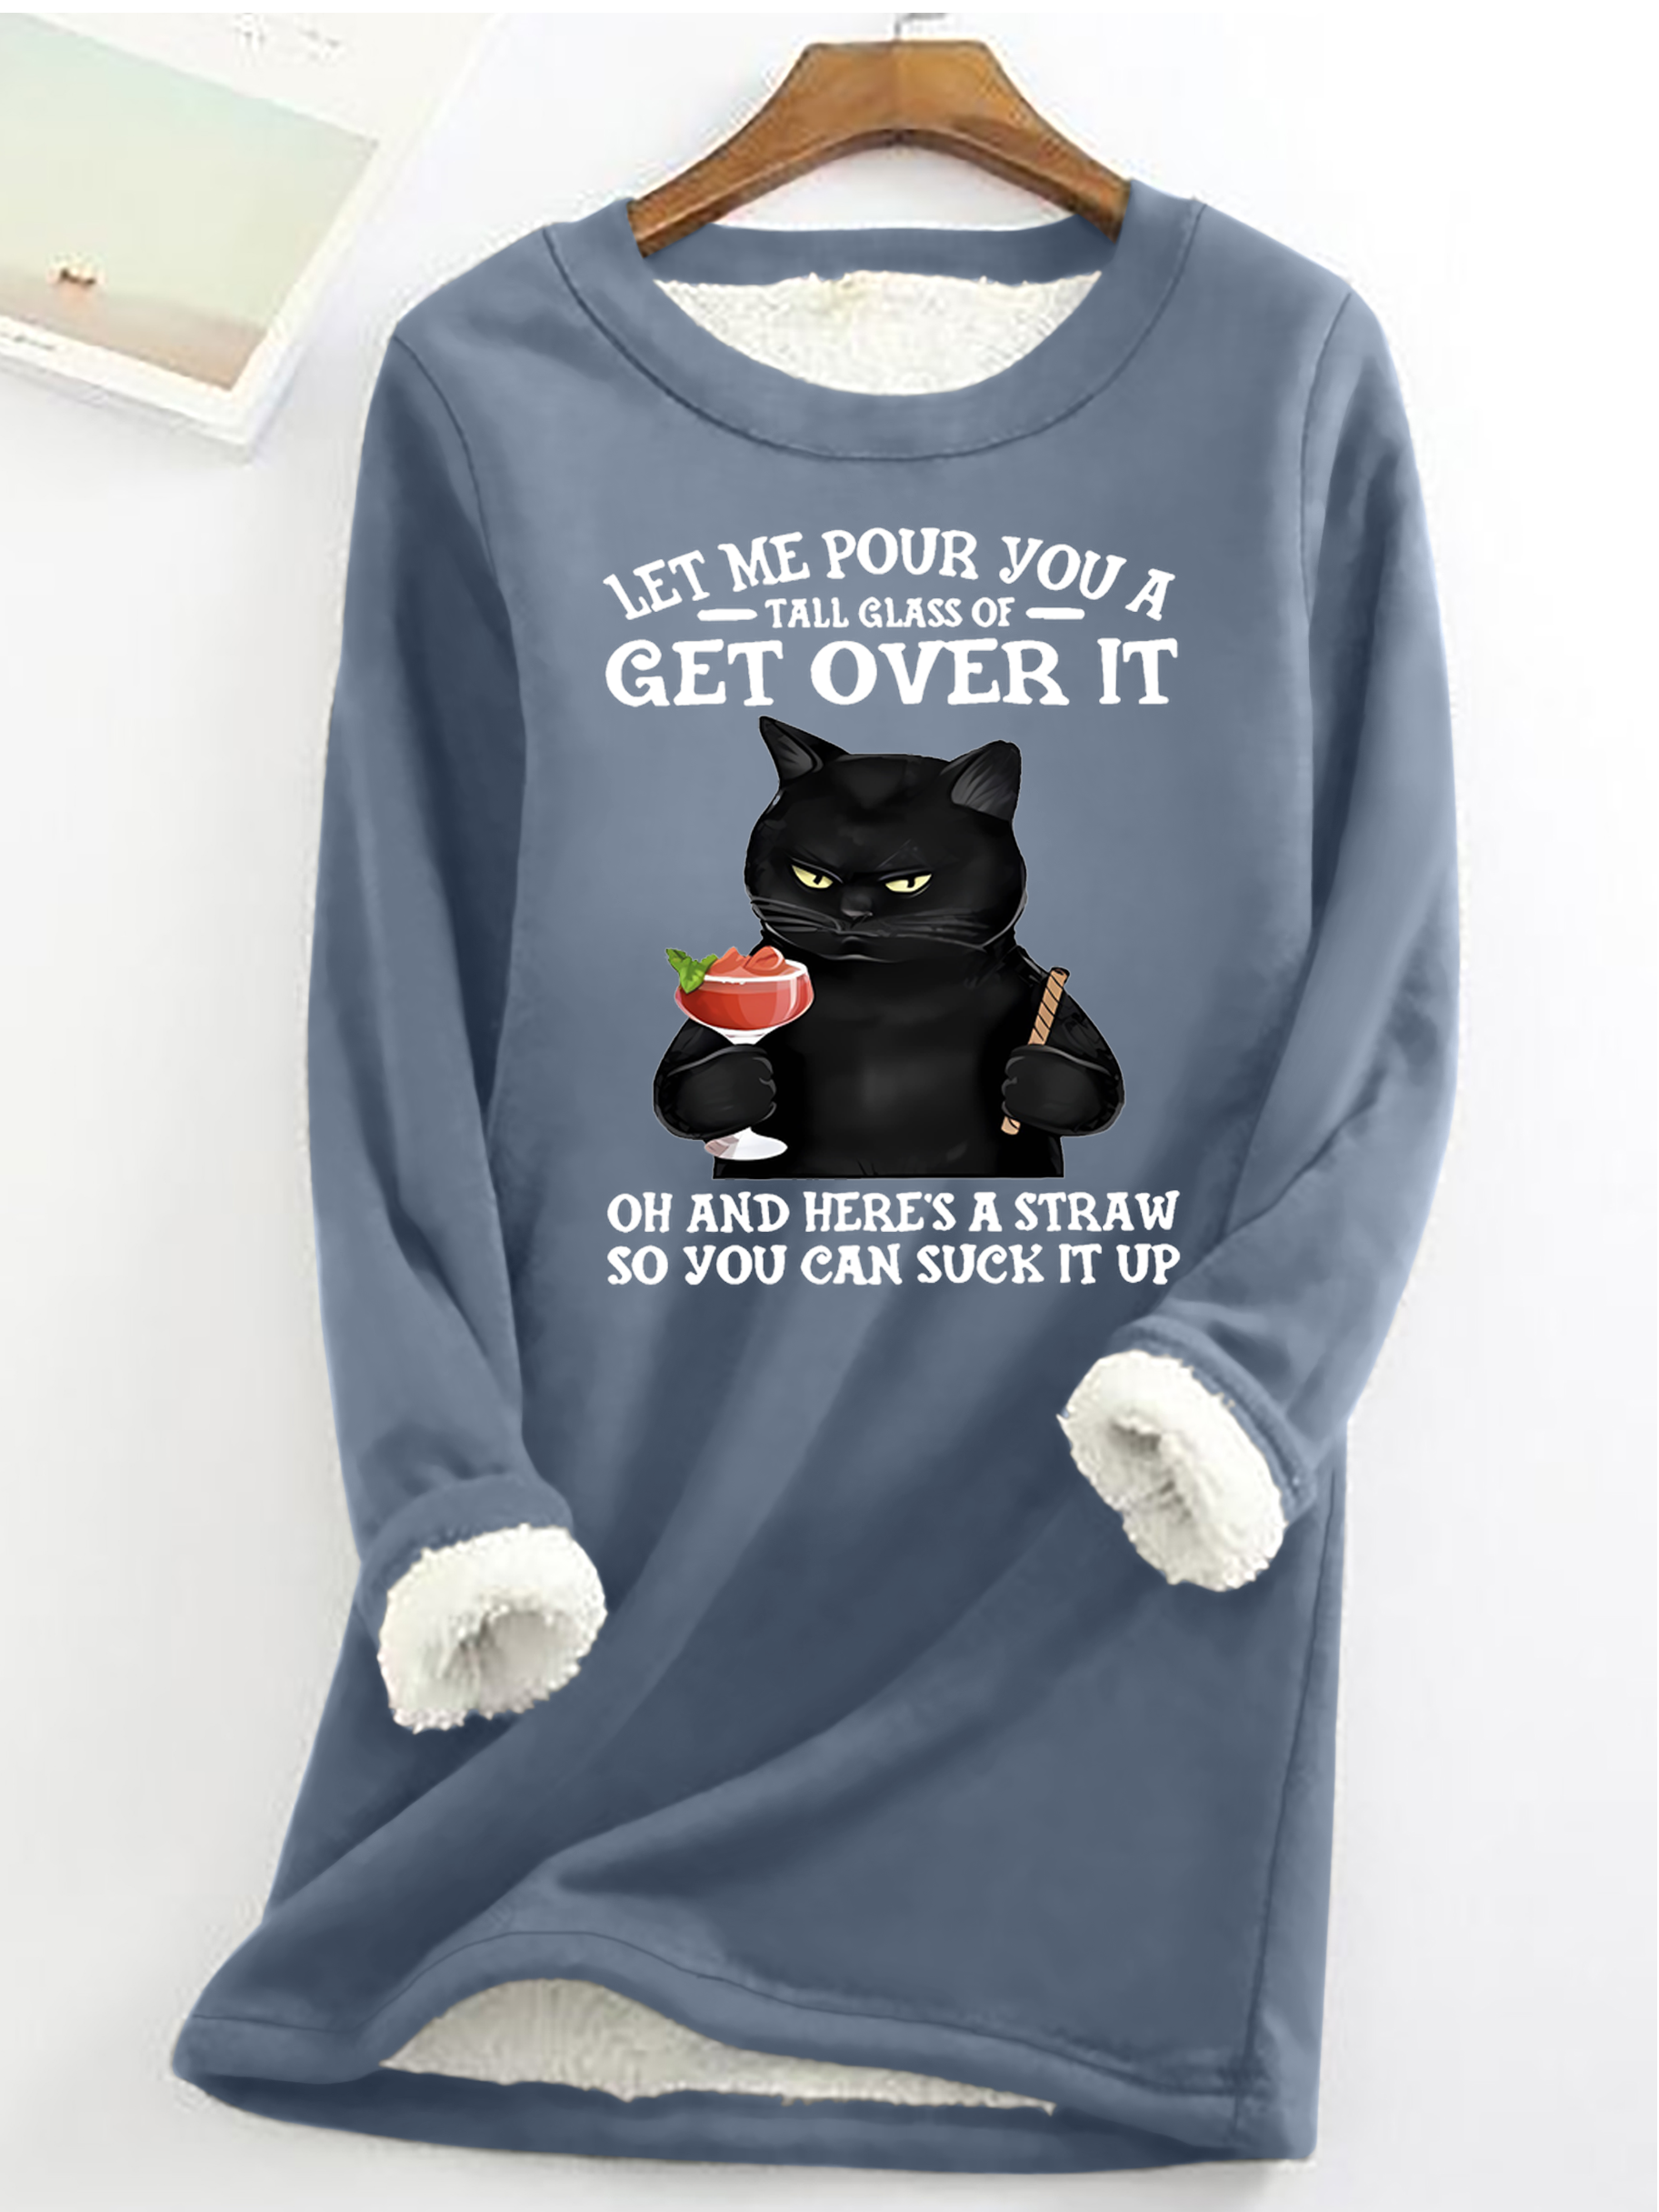 Let Me Pour You A Tall Glass Of Get Over It Oh And Here’s A Straw So You Can Suck It Up Funny Cat Crew Neck Fleece Sweatshirt